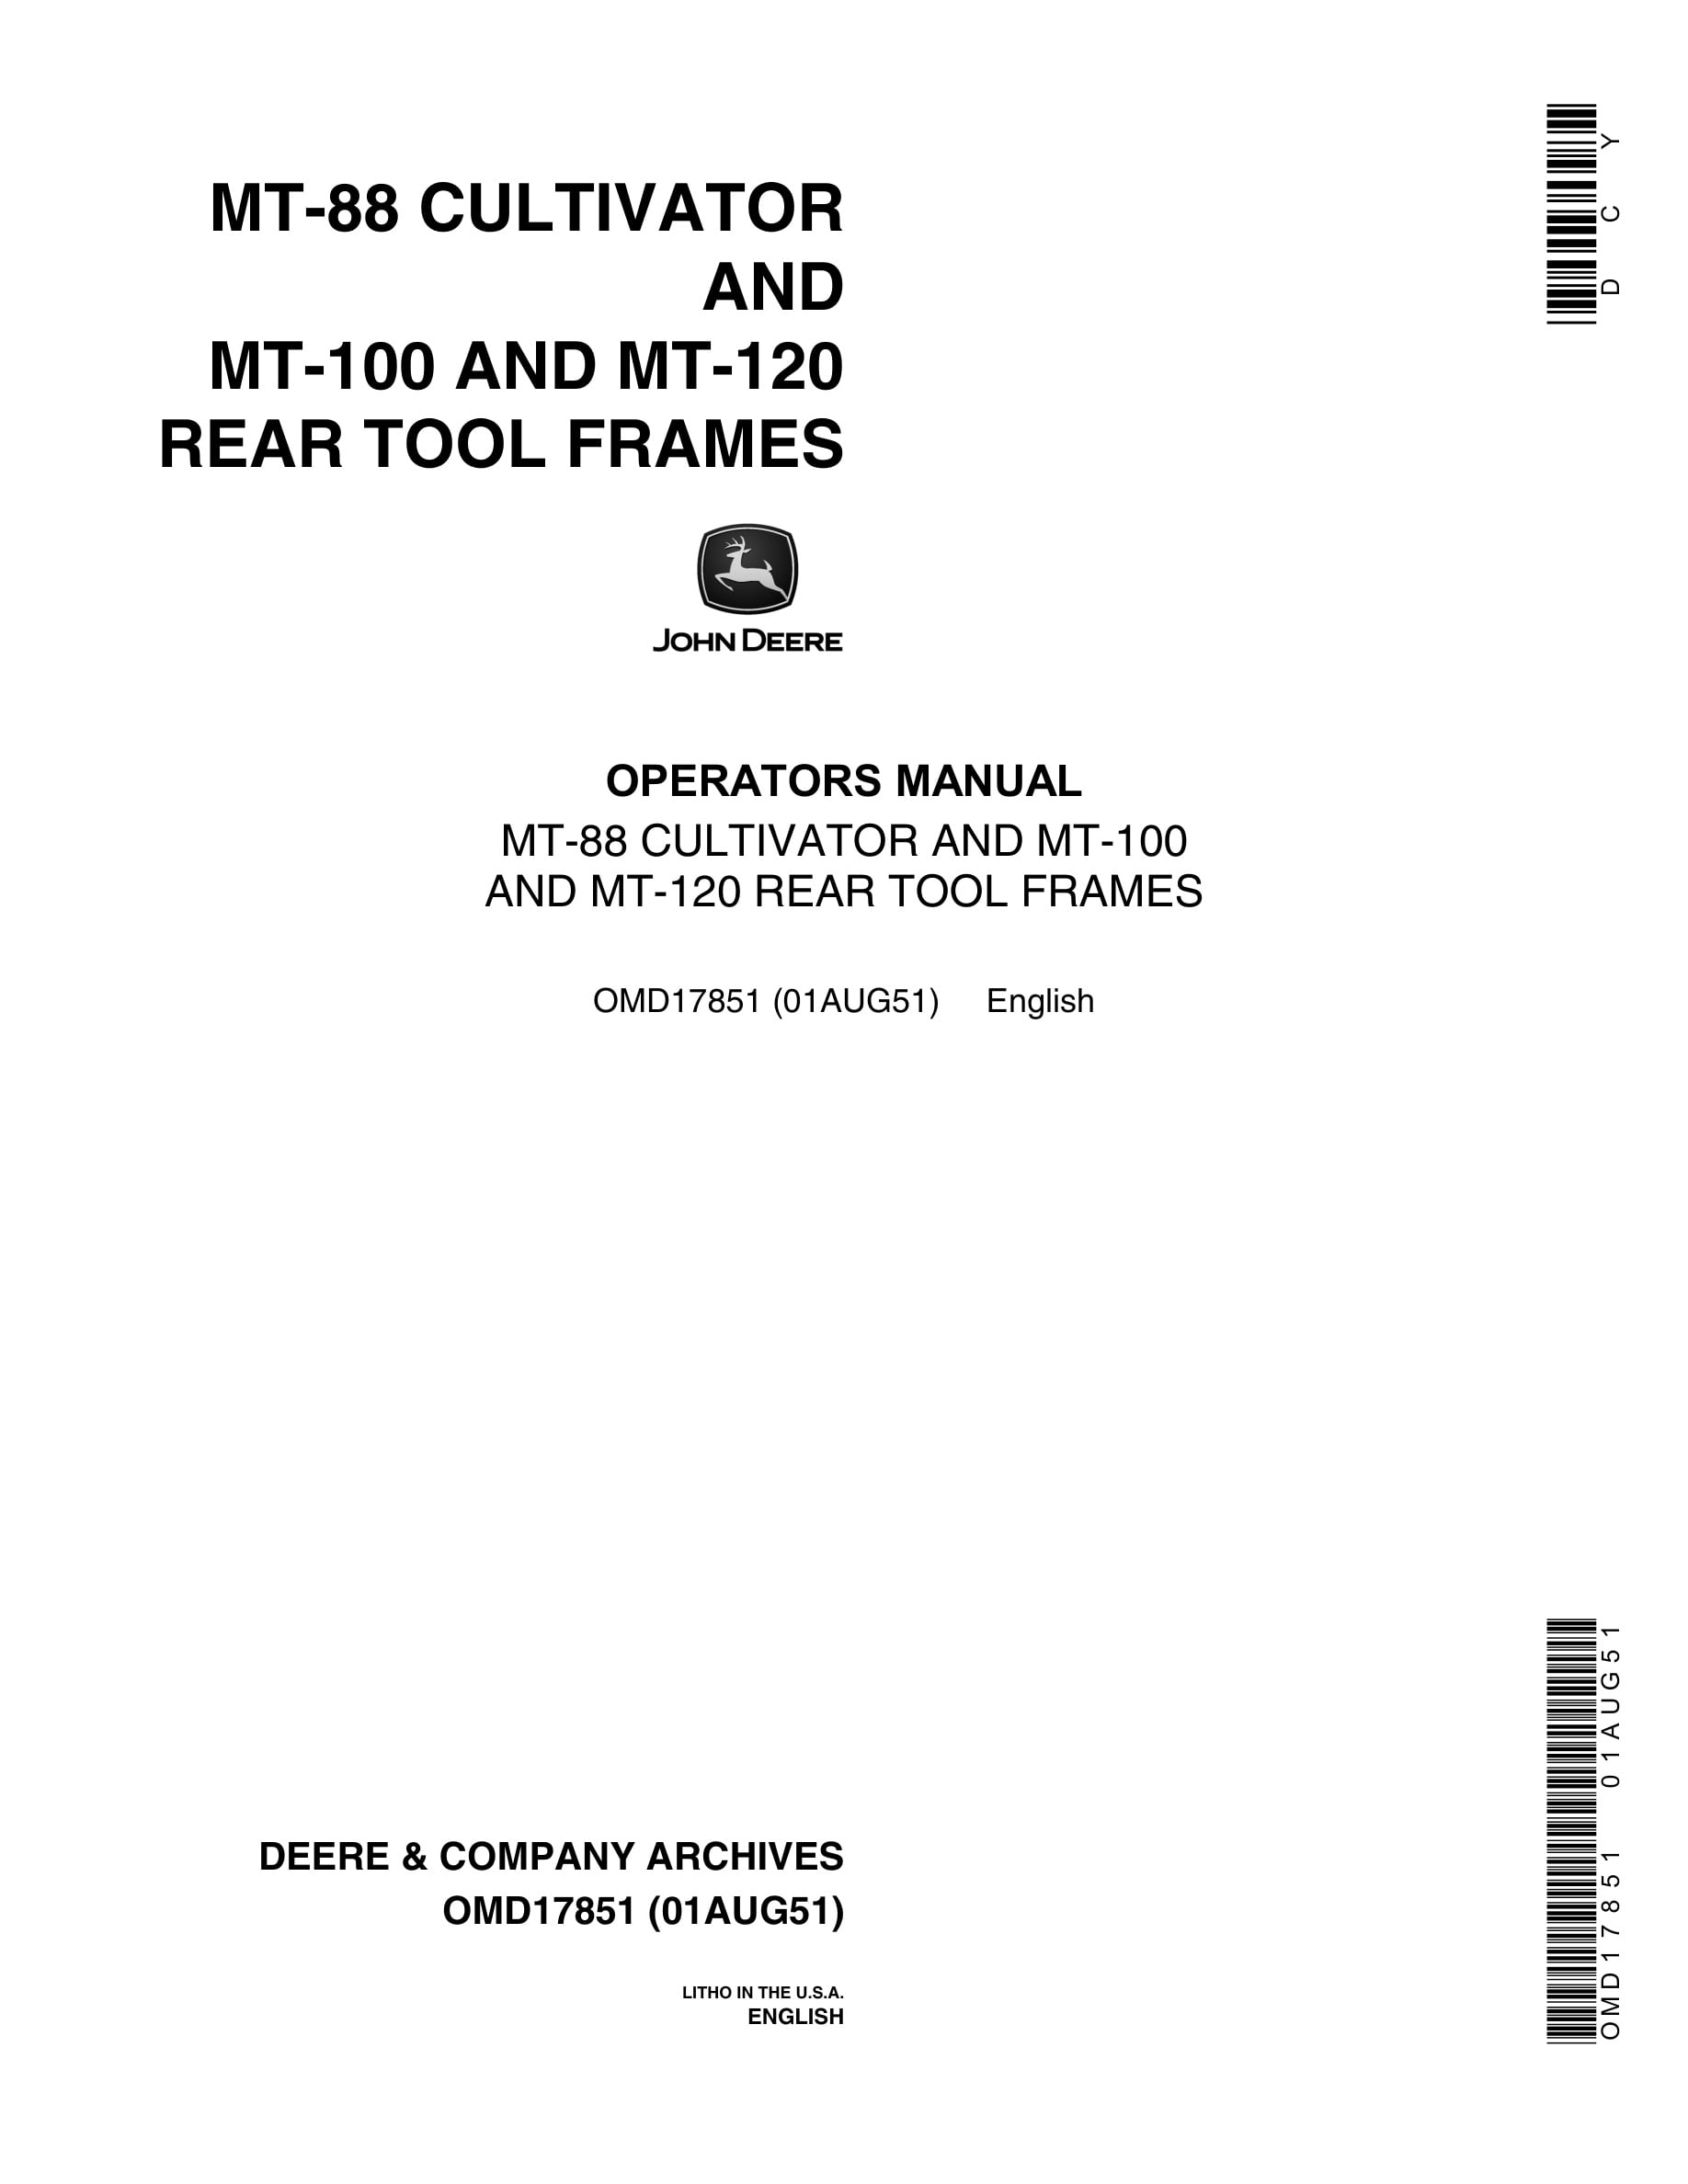 John Deere MT-88 CULTIVATOR AND MT-100 AND MT-120 REAR TOOL FRAMES Operator Manual OMD17851-1